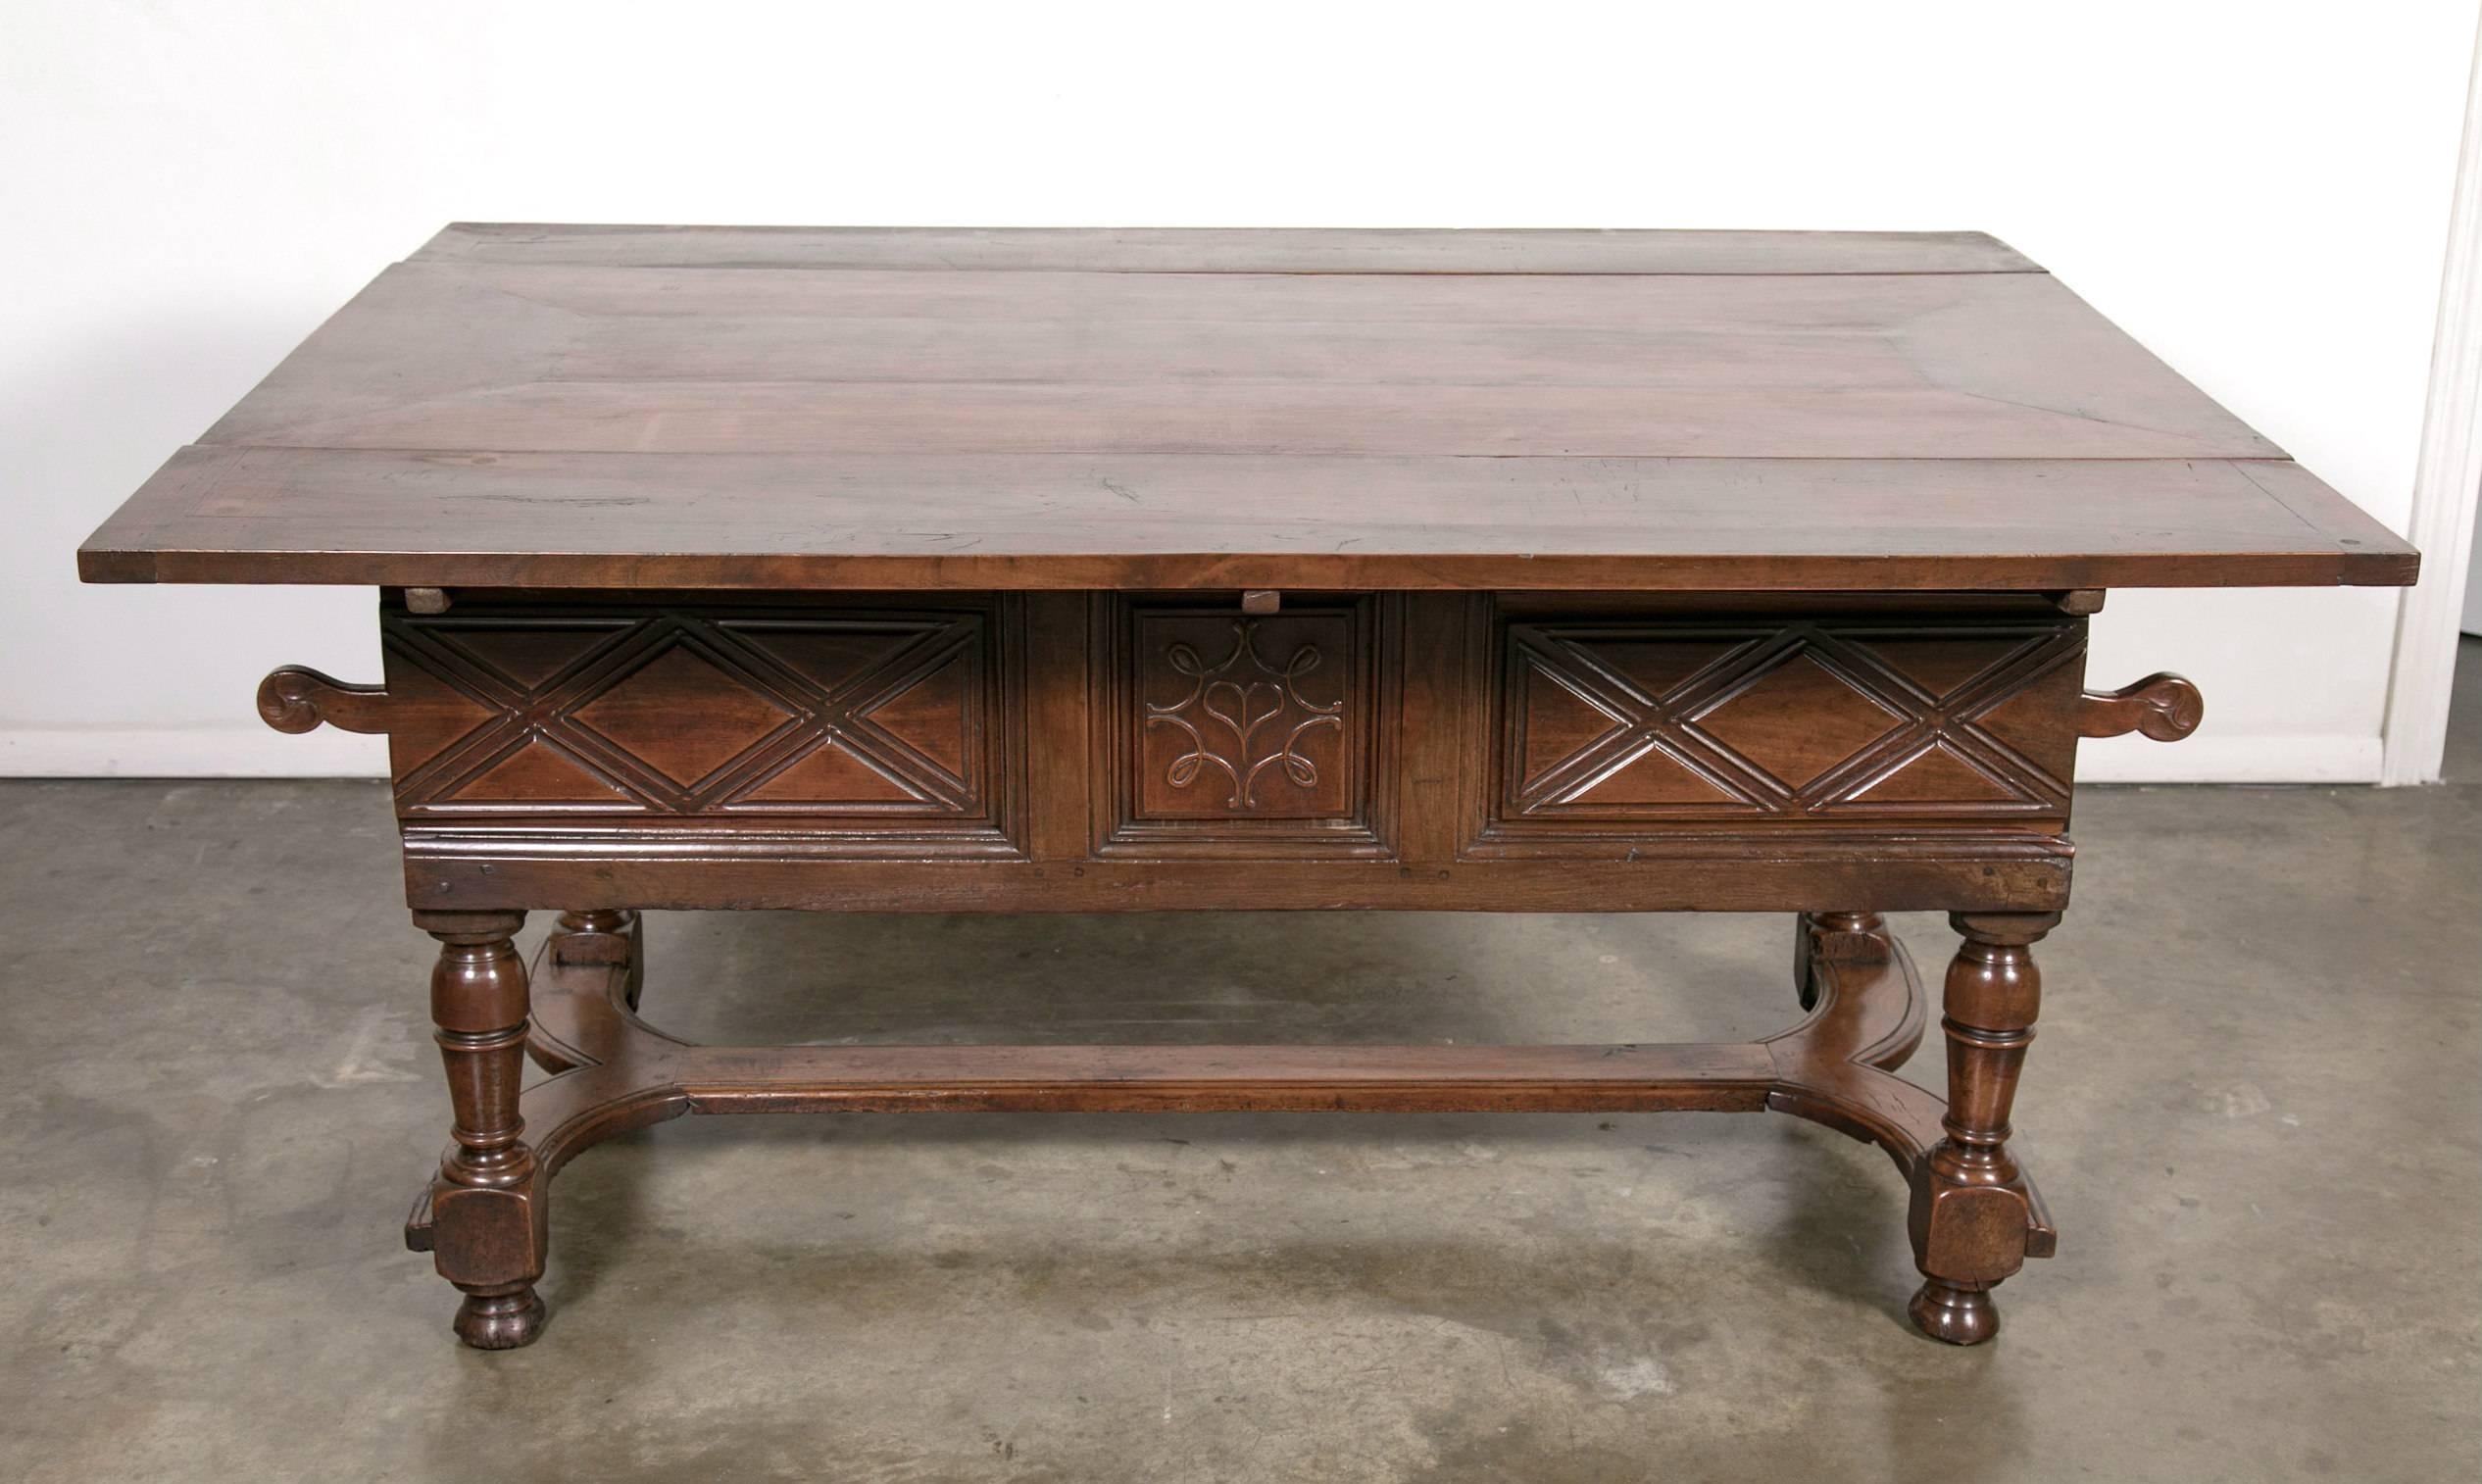 An 18th century solid cherry draw leaf work or pantry table handmade by talented artisans near Mont Saint Michel, an island commune in Normandy. This Country French draw leaf table was often found in small farm houses where it doubled as a work